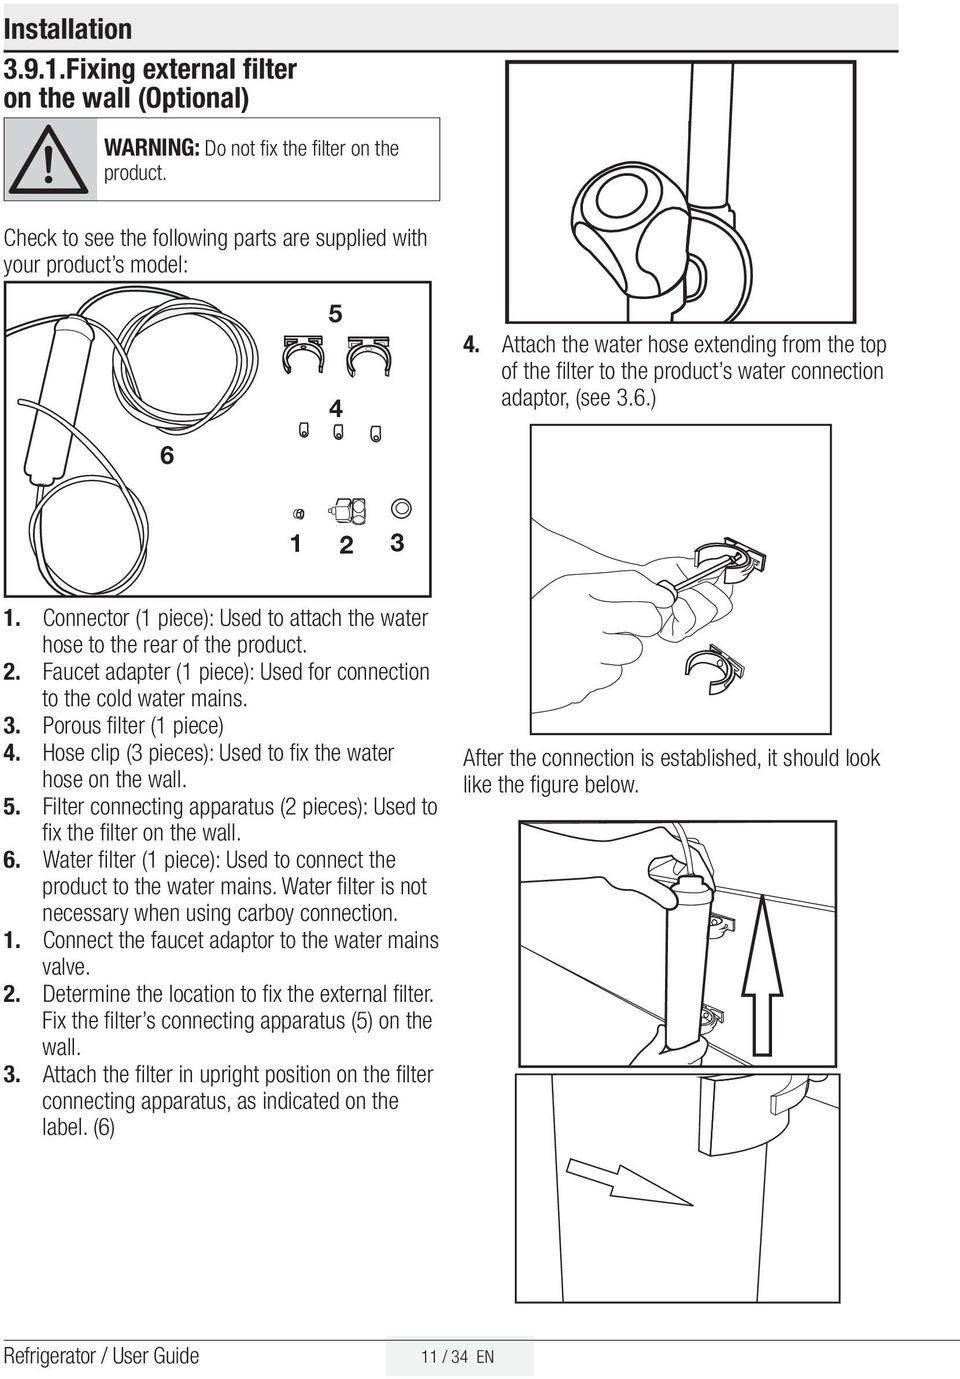 2. Faucet adapter (1 piece): Used for connection to the cold water mains. 3. Porous filter (1 piece) 4. Hose clip (3 pieces): Used to fix the water hose on the wall. 5.